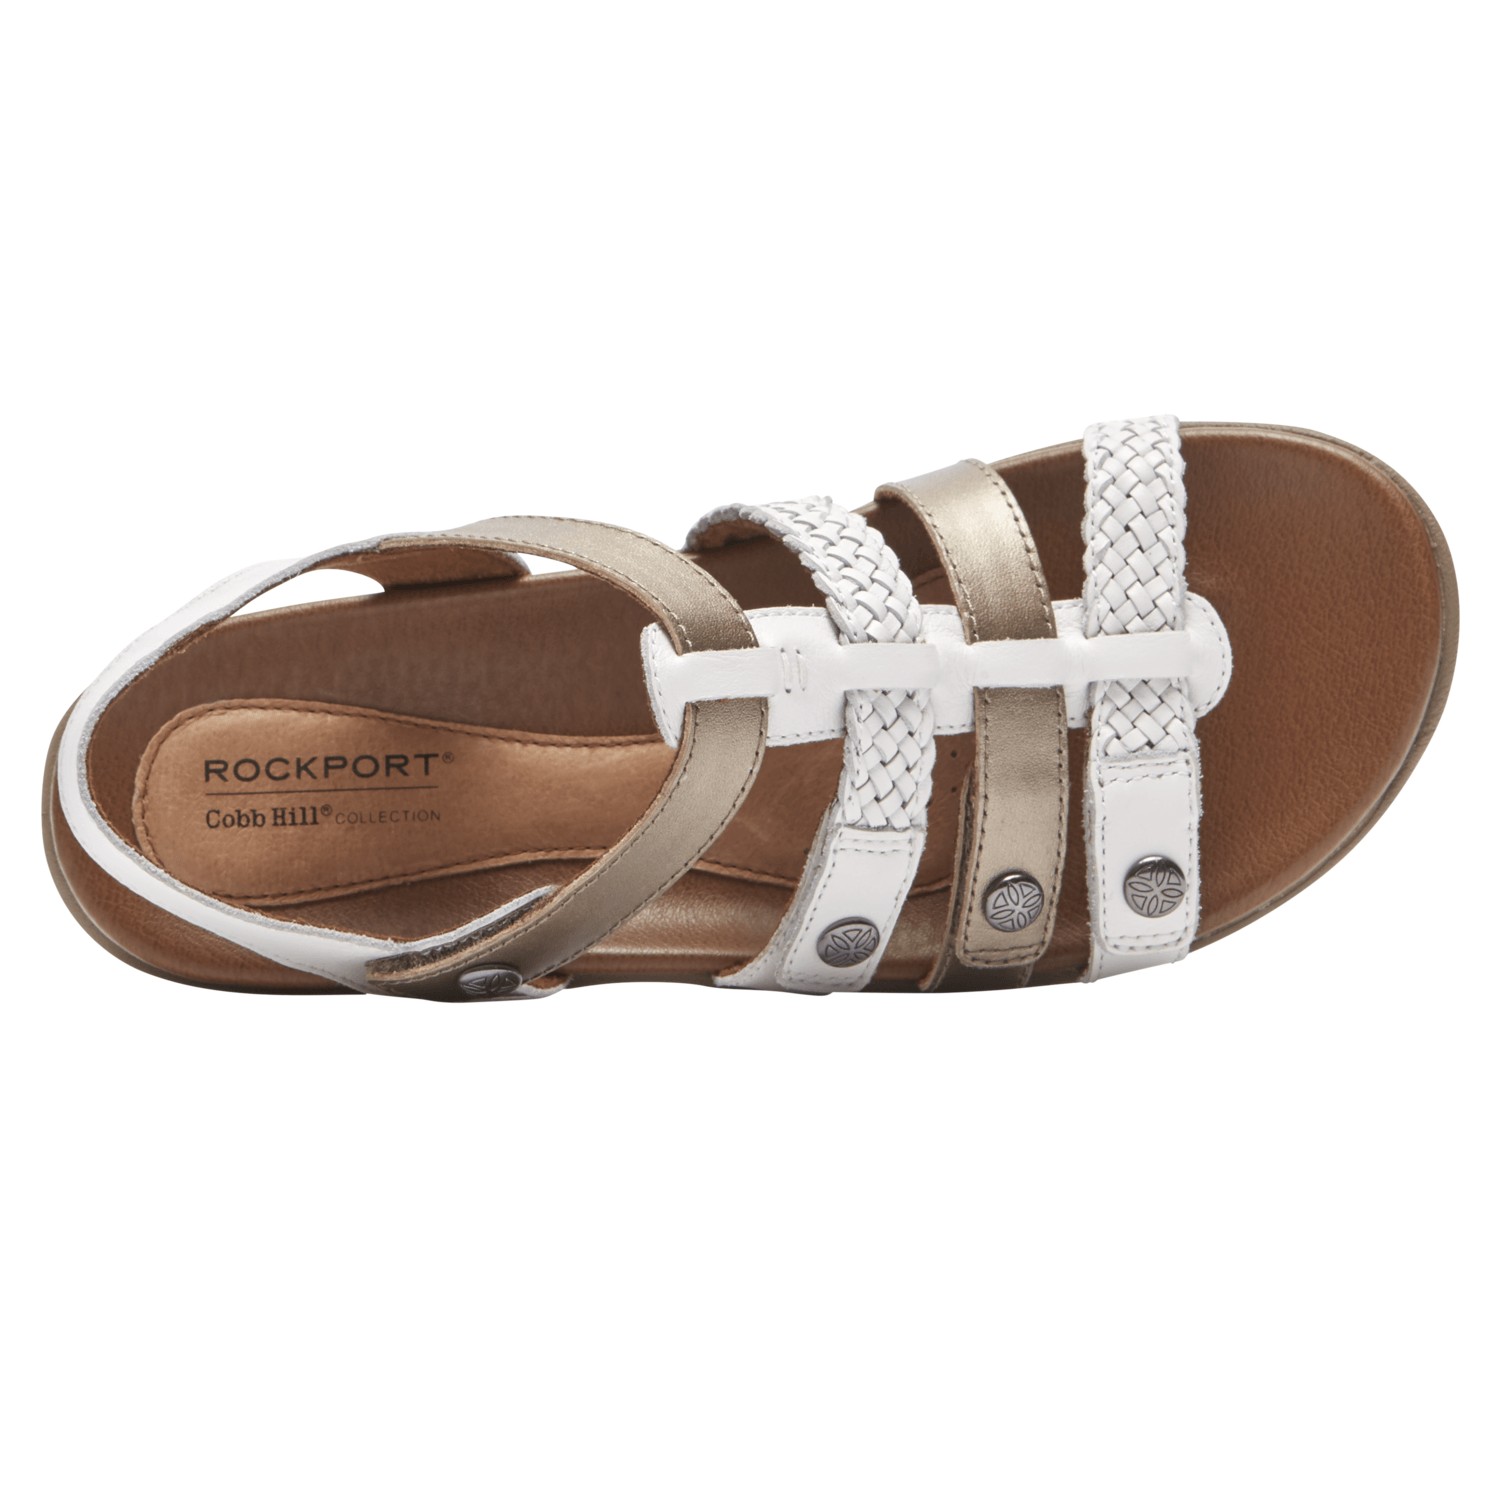 Rockport Cobb Hill Rubey T Strap Womens Sandal White Multi 8 Medium Rockport Cobb Hill Collection RP-839